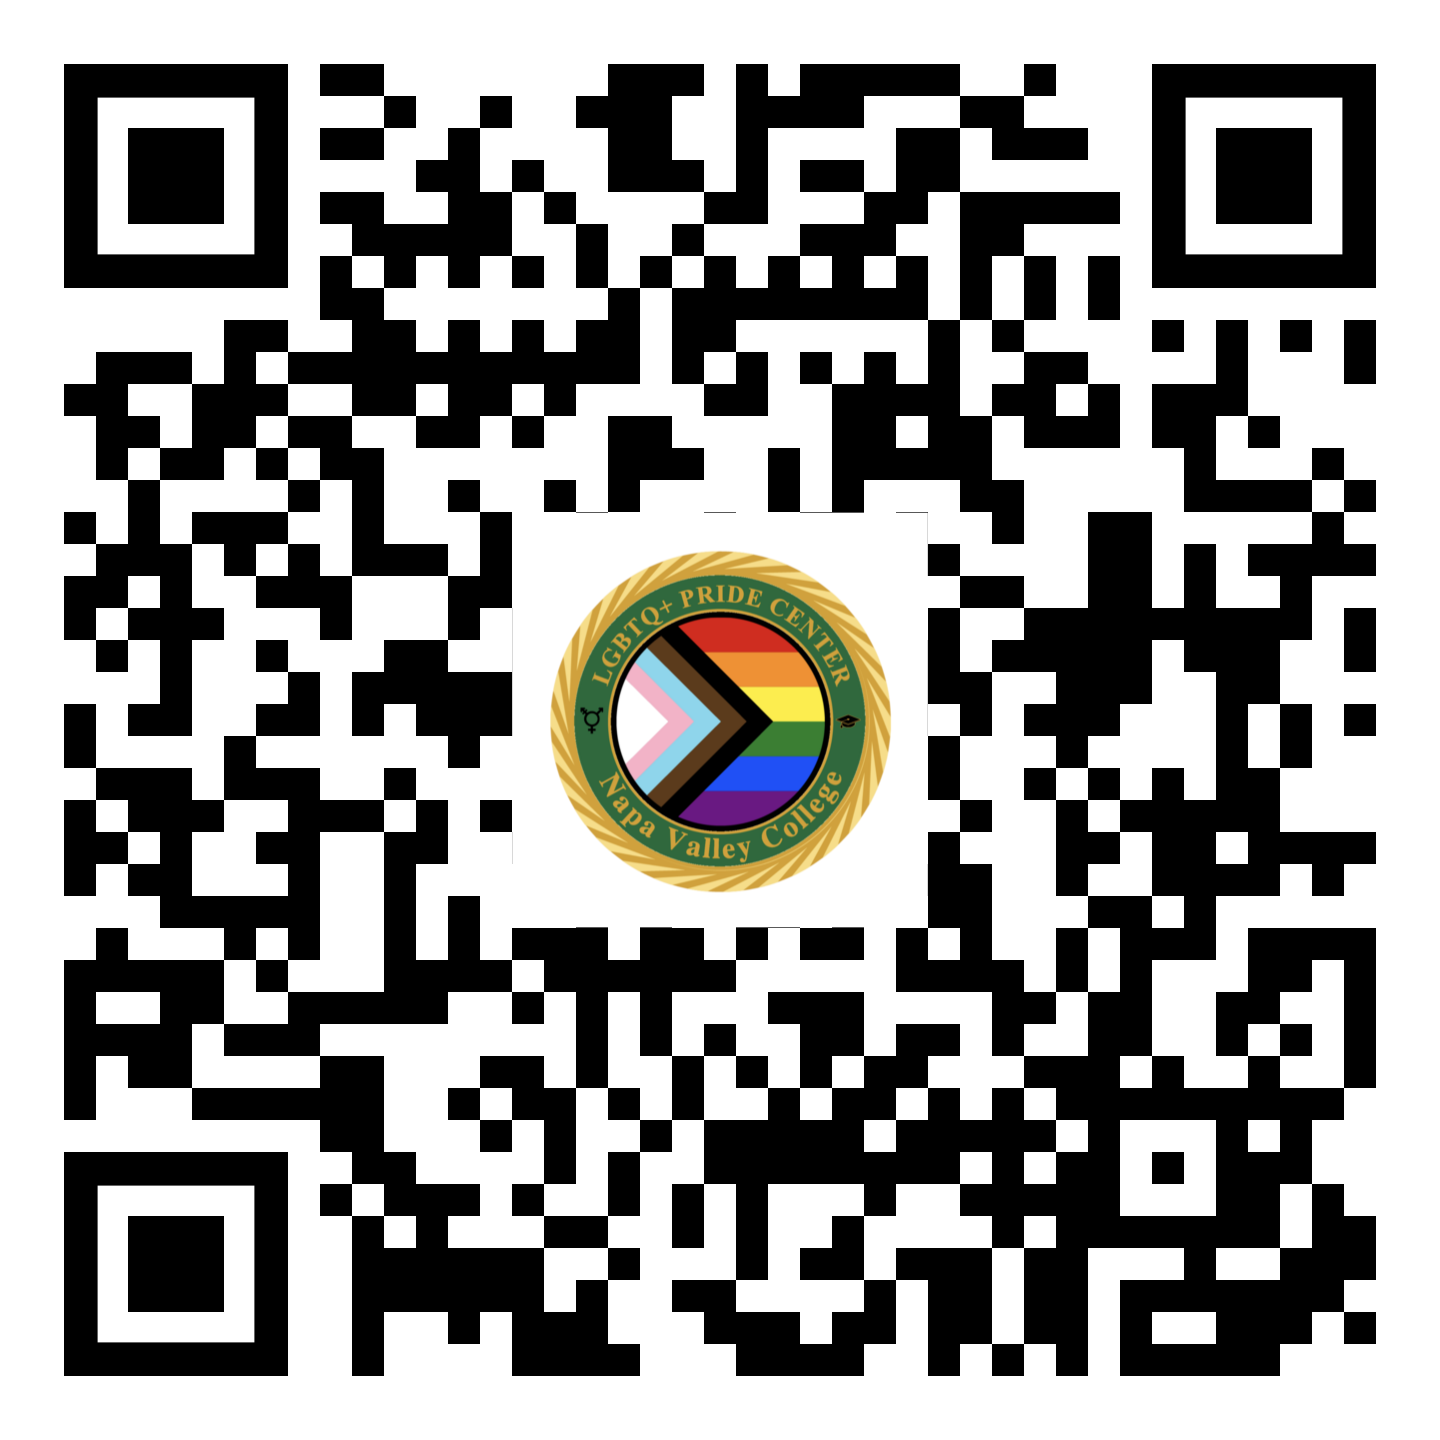 QR Code To Join Pride Center